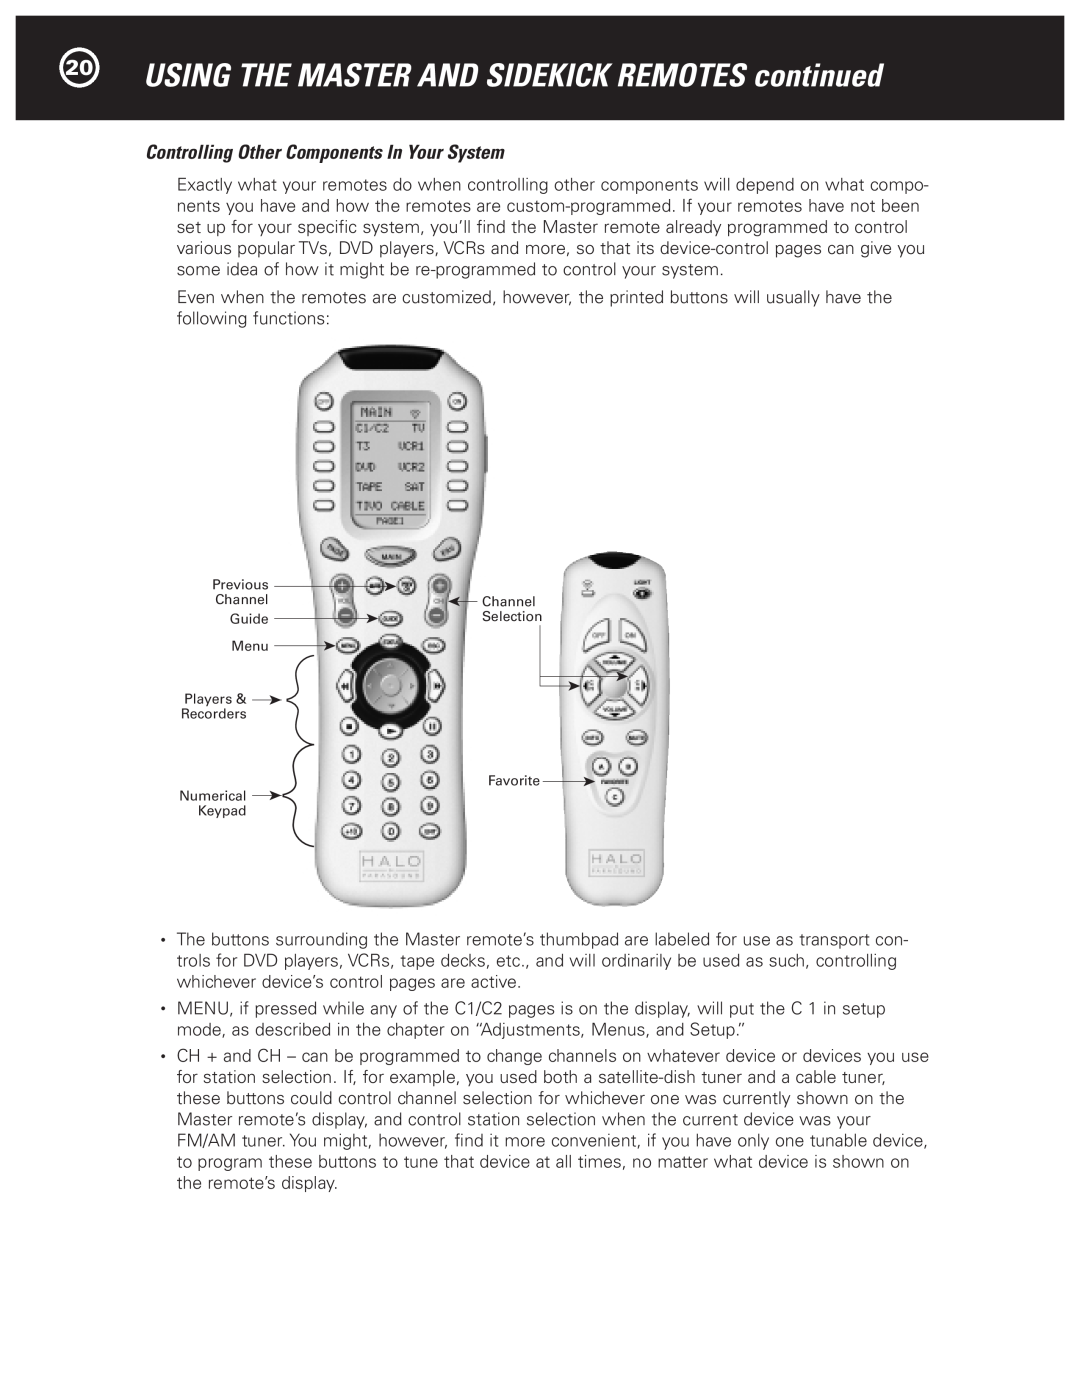 Parasound Halo C1 Controller manual 20USING THE MASTER AND SIDEKICK REMOTES continued 